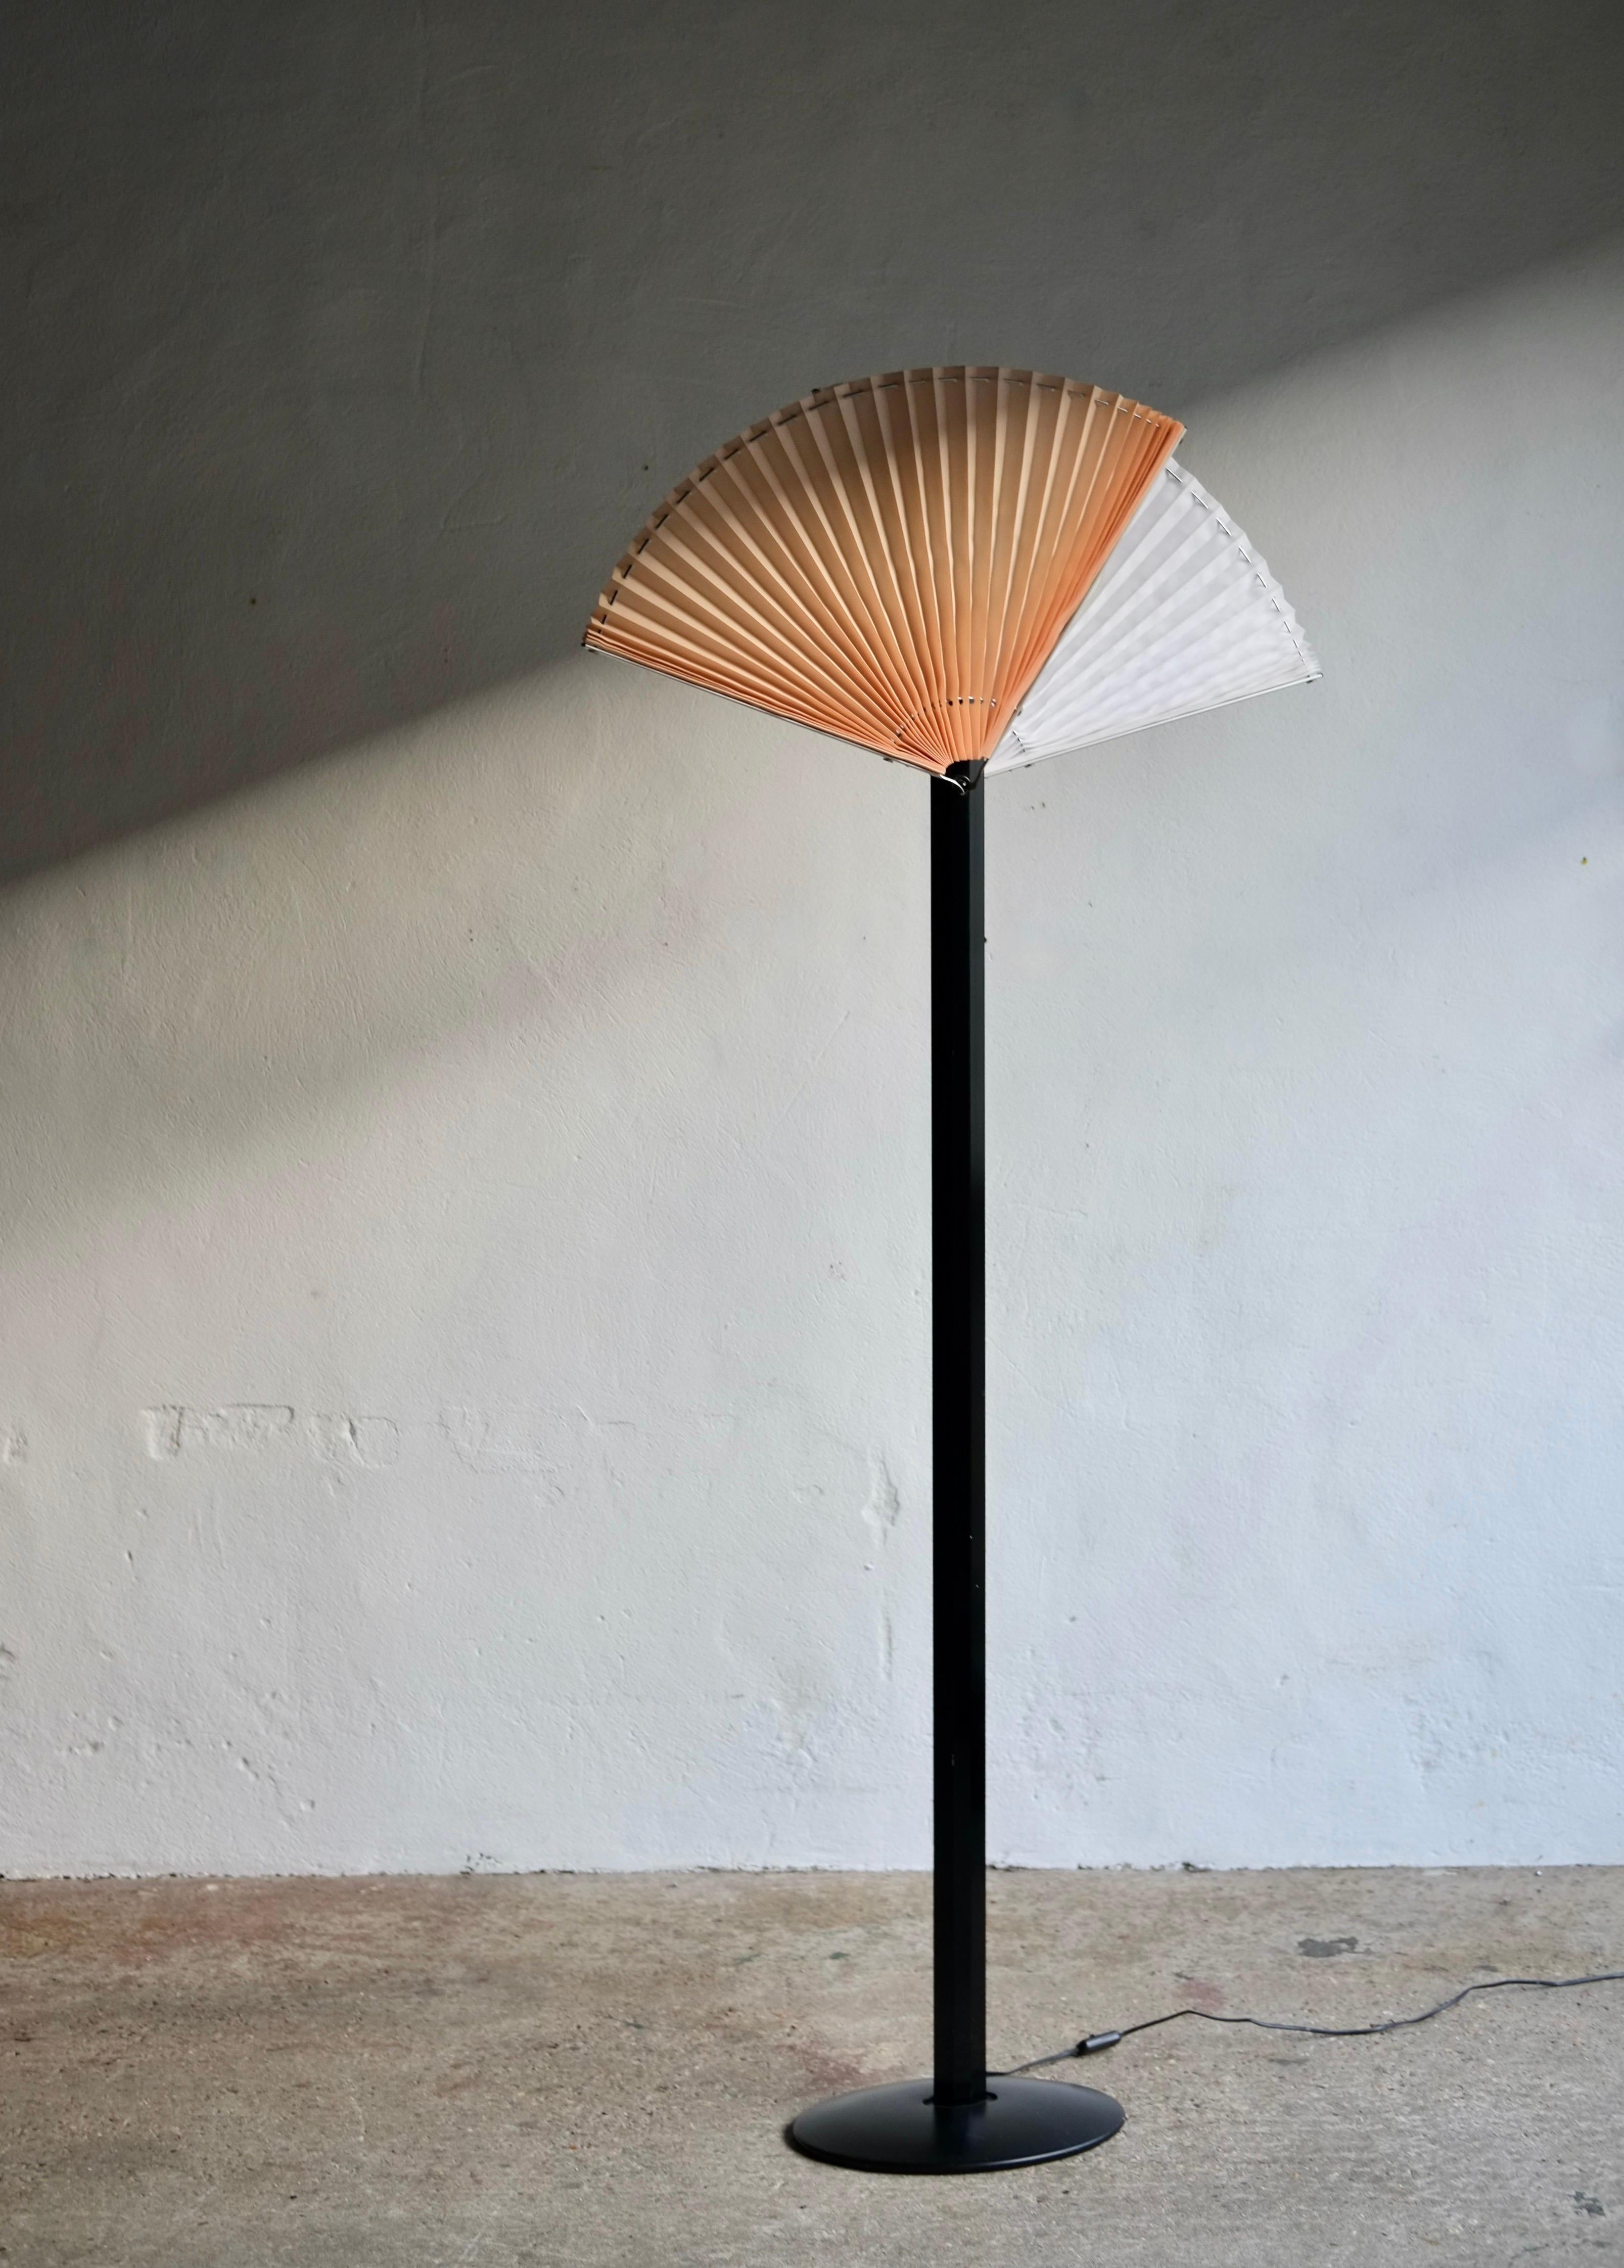 Butterfly floor lamp designed by Afra and Tobia Scarpa for Italian lighting company Flos, Italy, 1985.

Featuring fan like lamp shades that enable various light, one shade is white and the other a peachy pink. The lamp is in good vintage condition